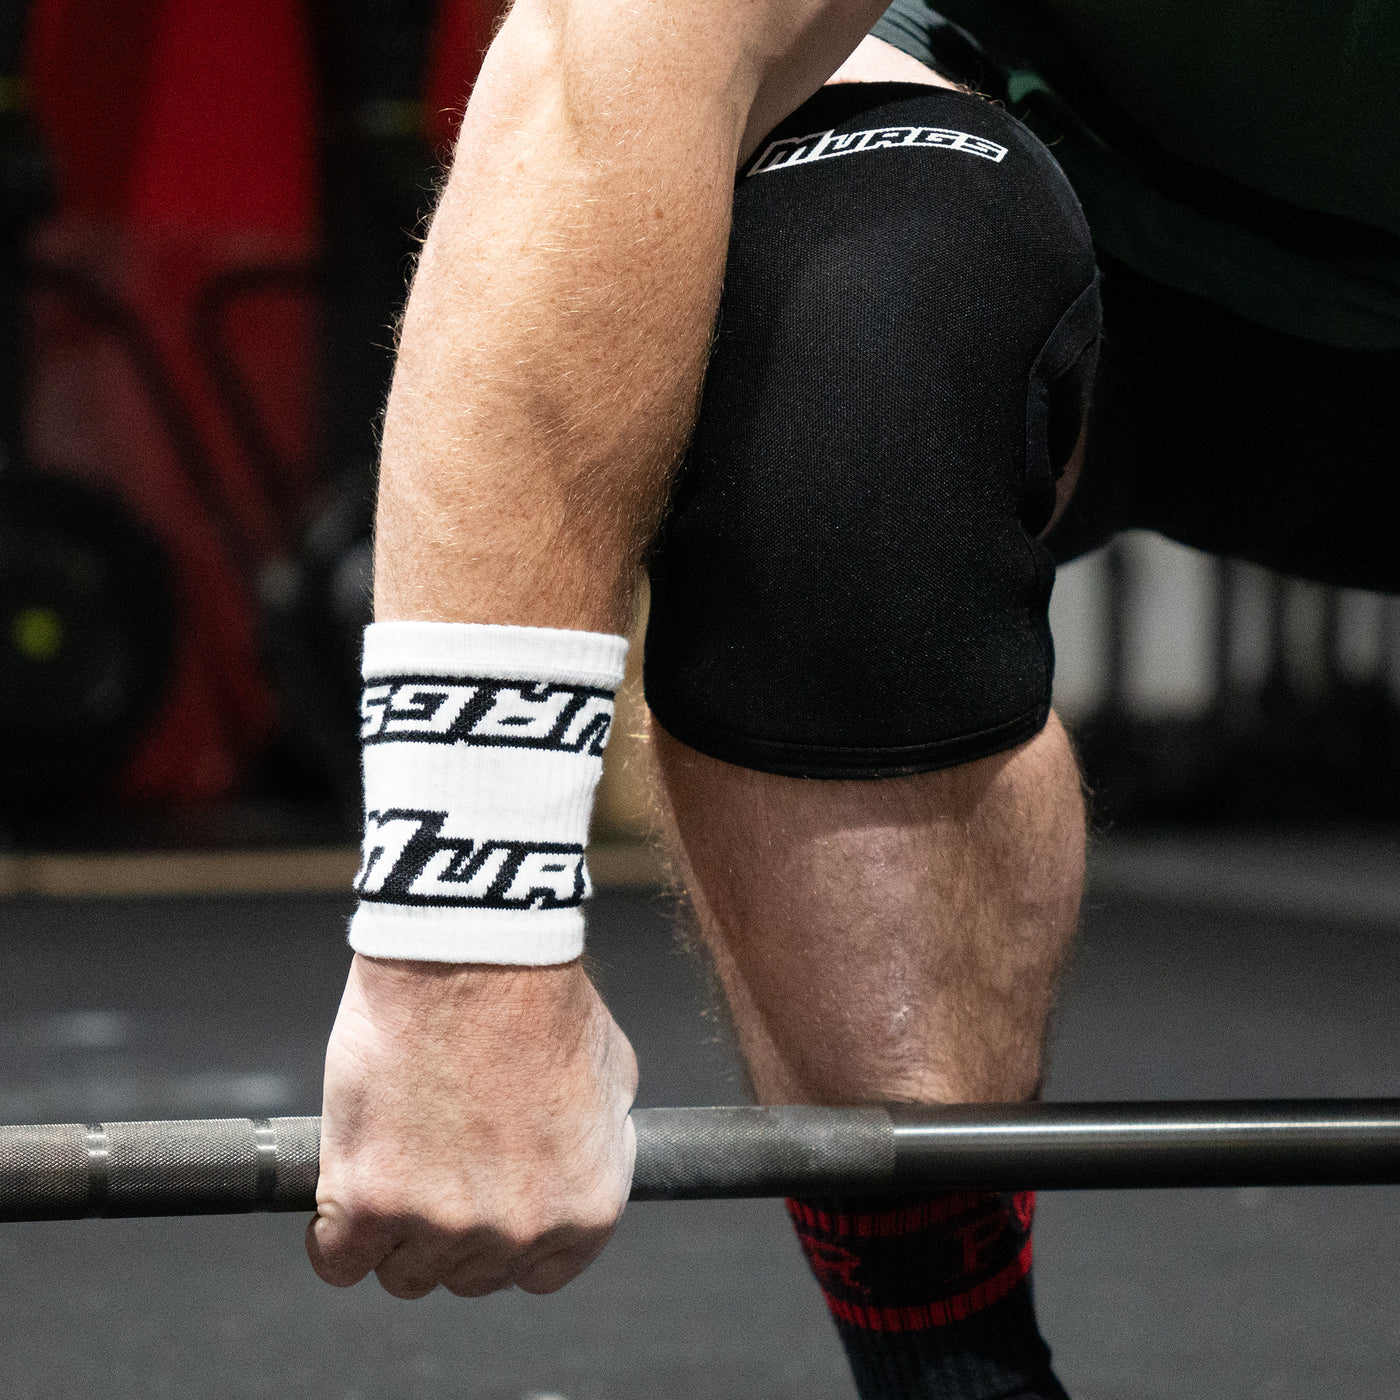 Athlete in white murgs wristbands during crossfit